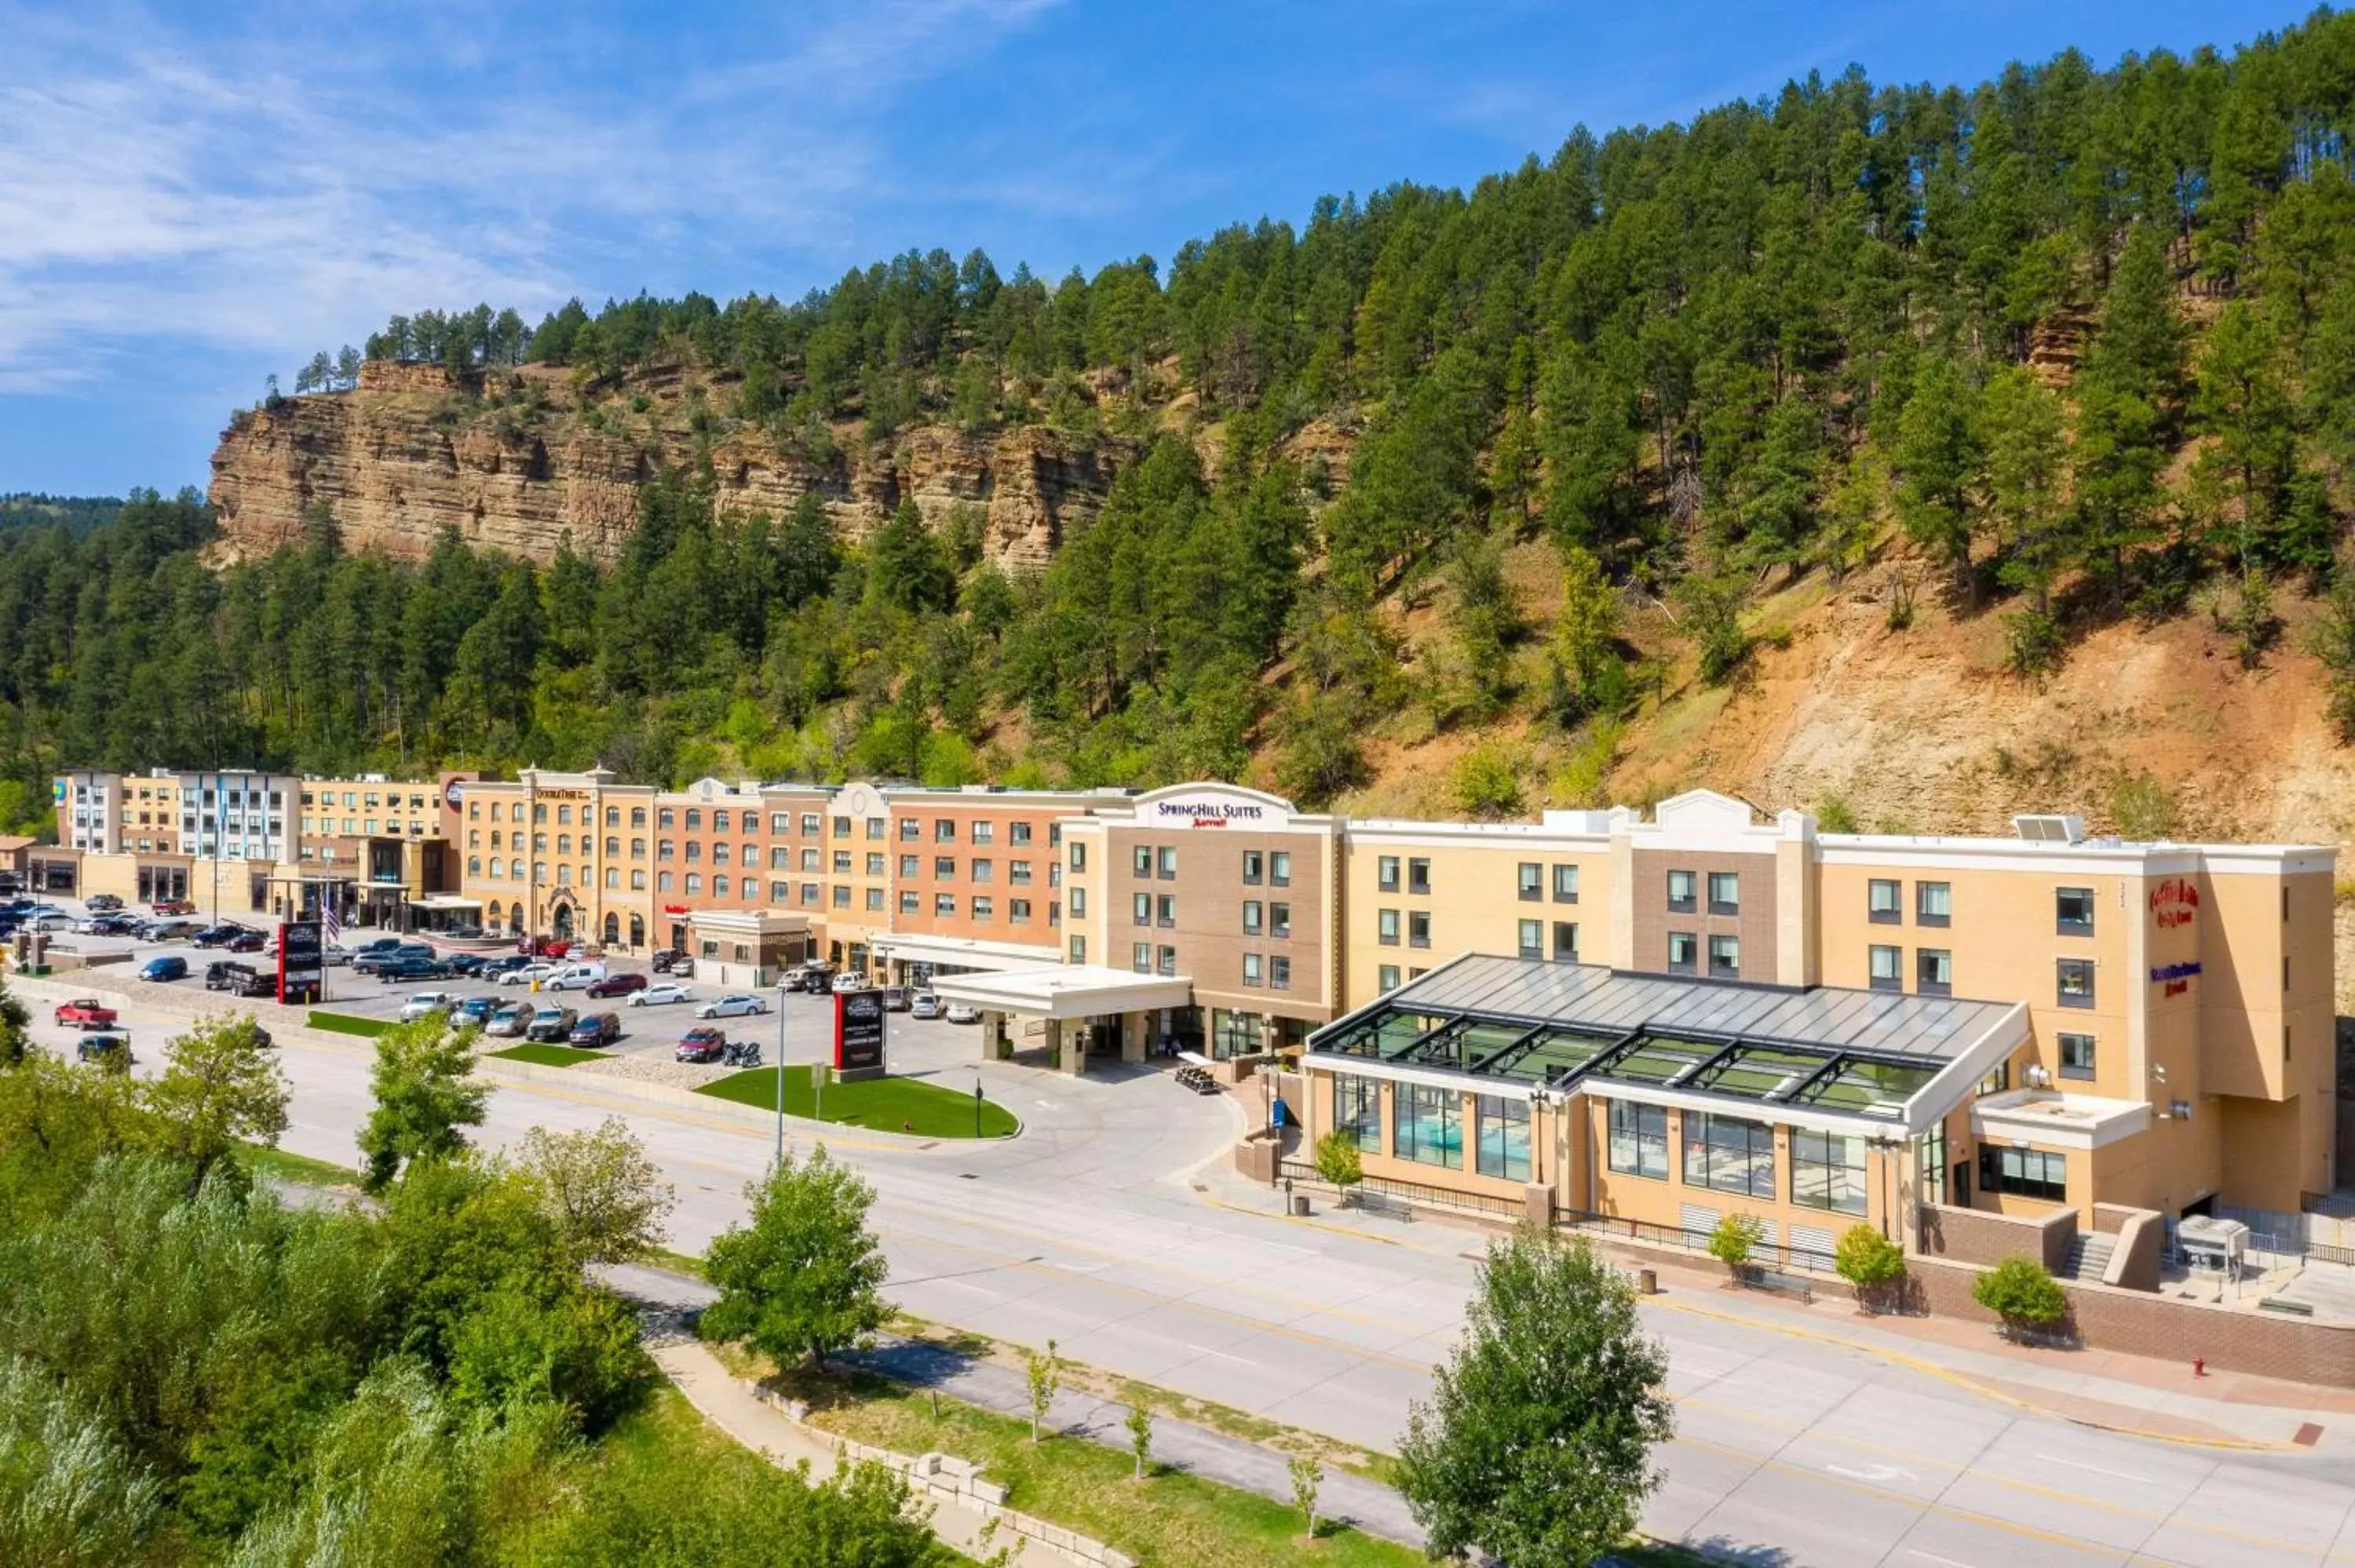 Property building in DoubleTree by Hilton Deadwood at Cadillac Jack's